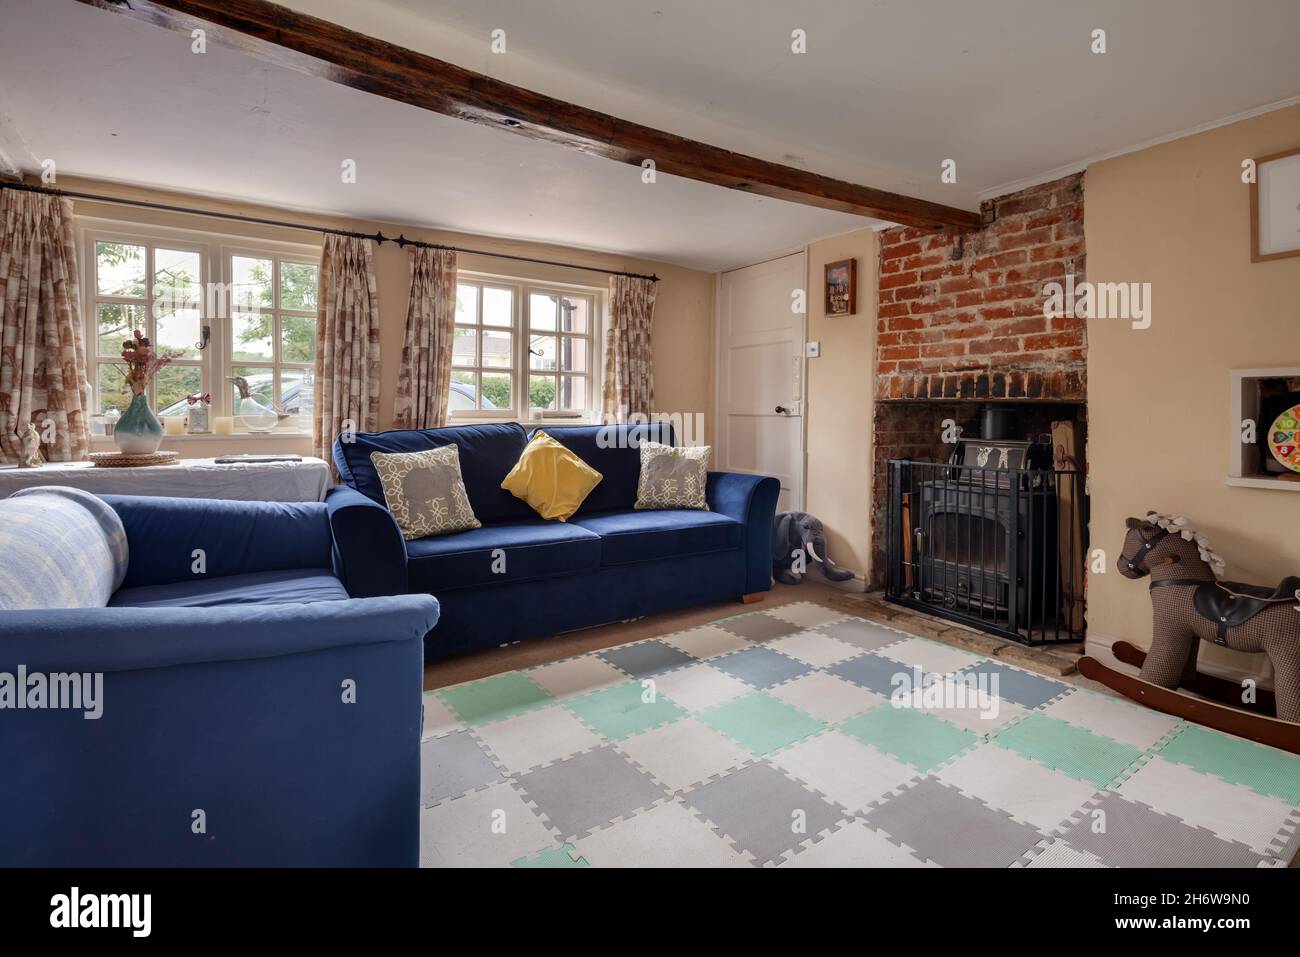 Hargrave, Suffolk, England - June 10 2020: Traditional English Country Cottage lounge or living room with cast iron wood burning stove and low ceiling Stock Photo